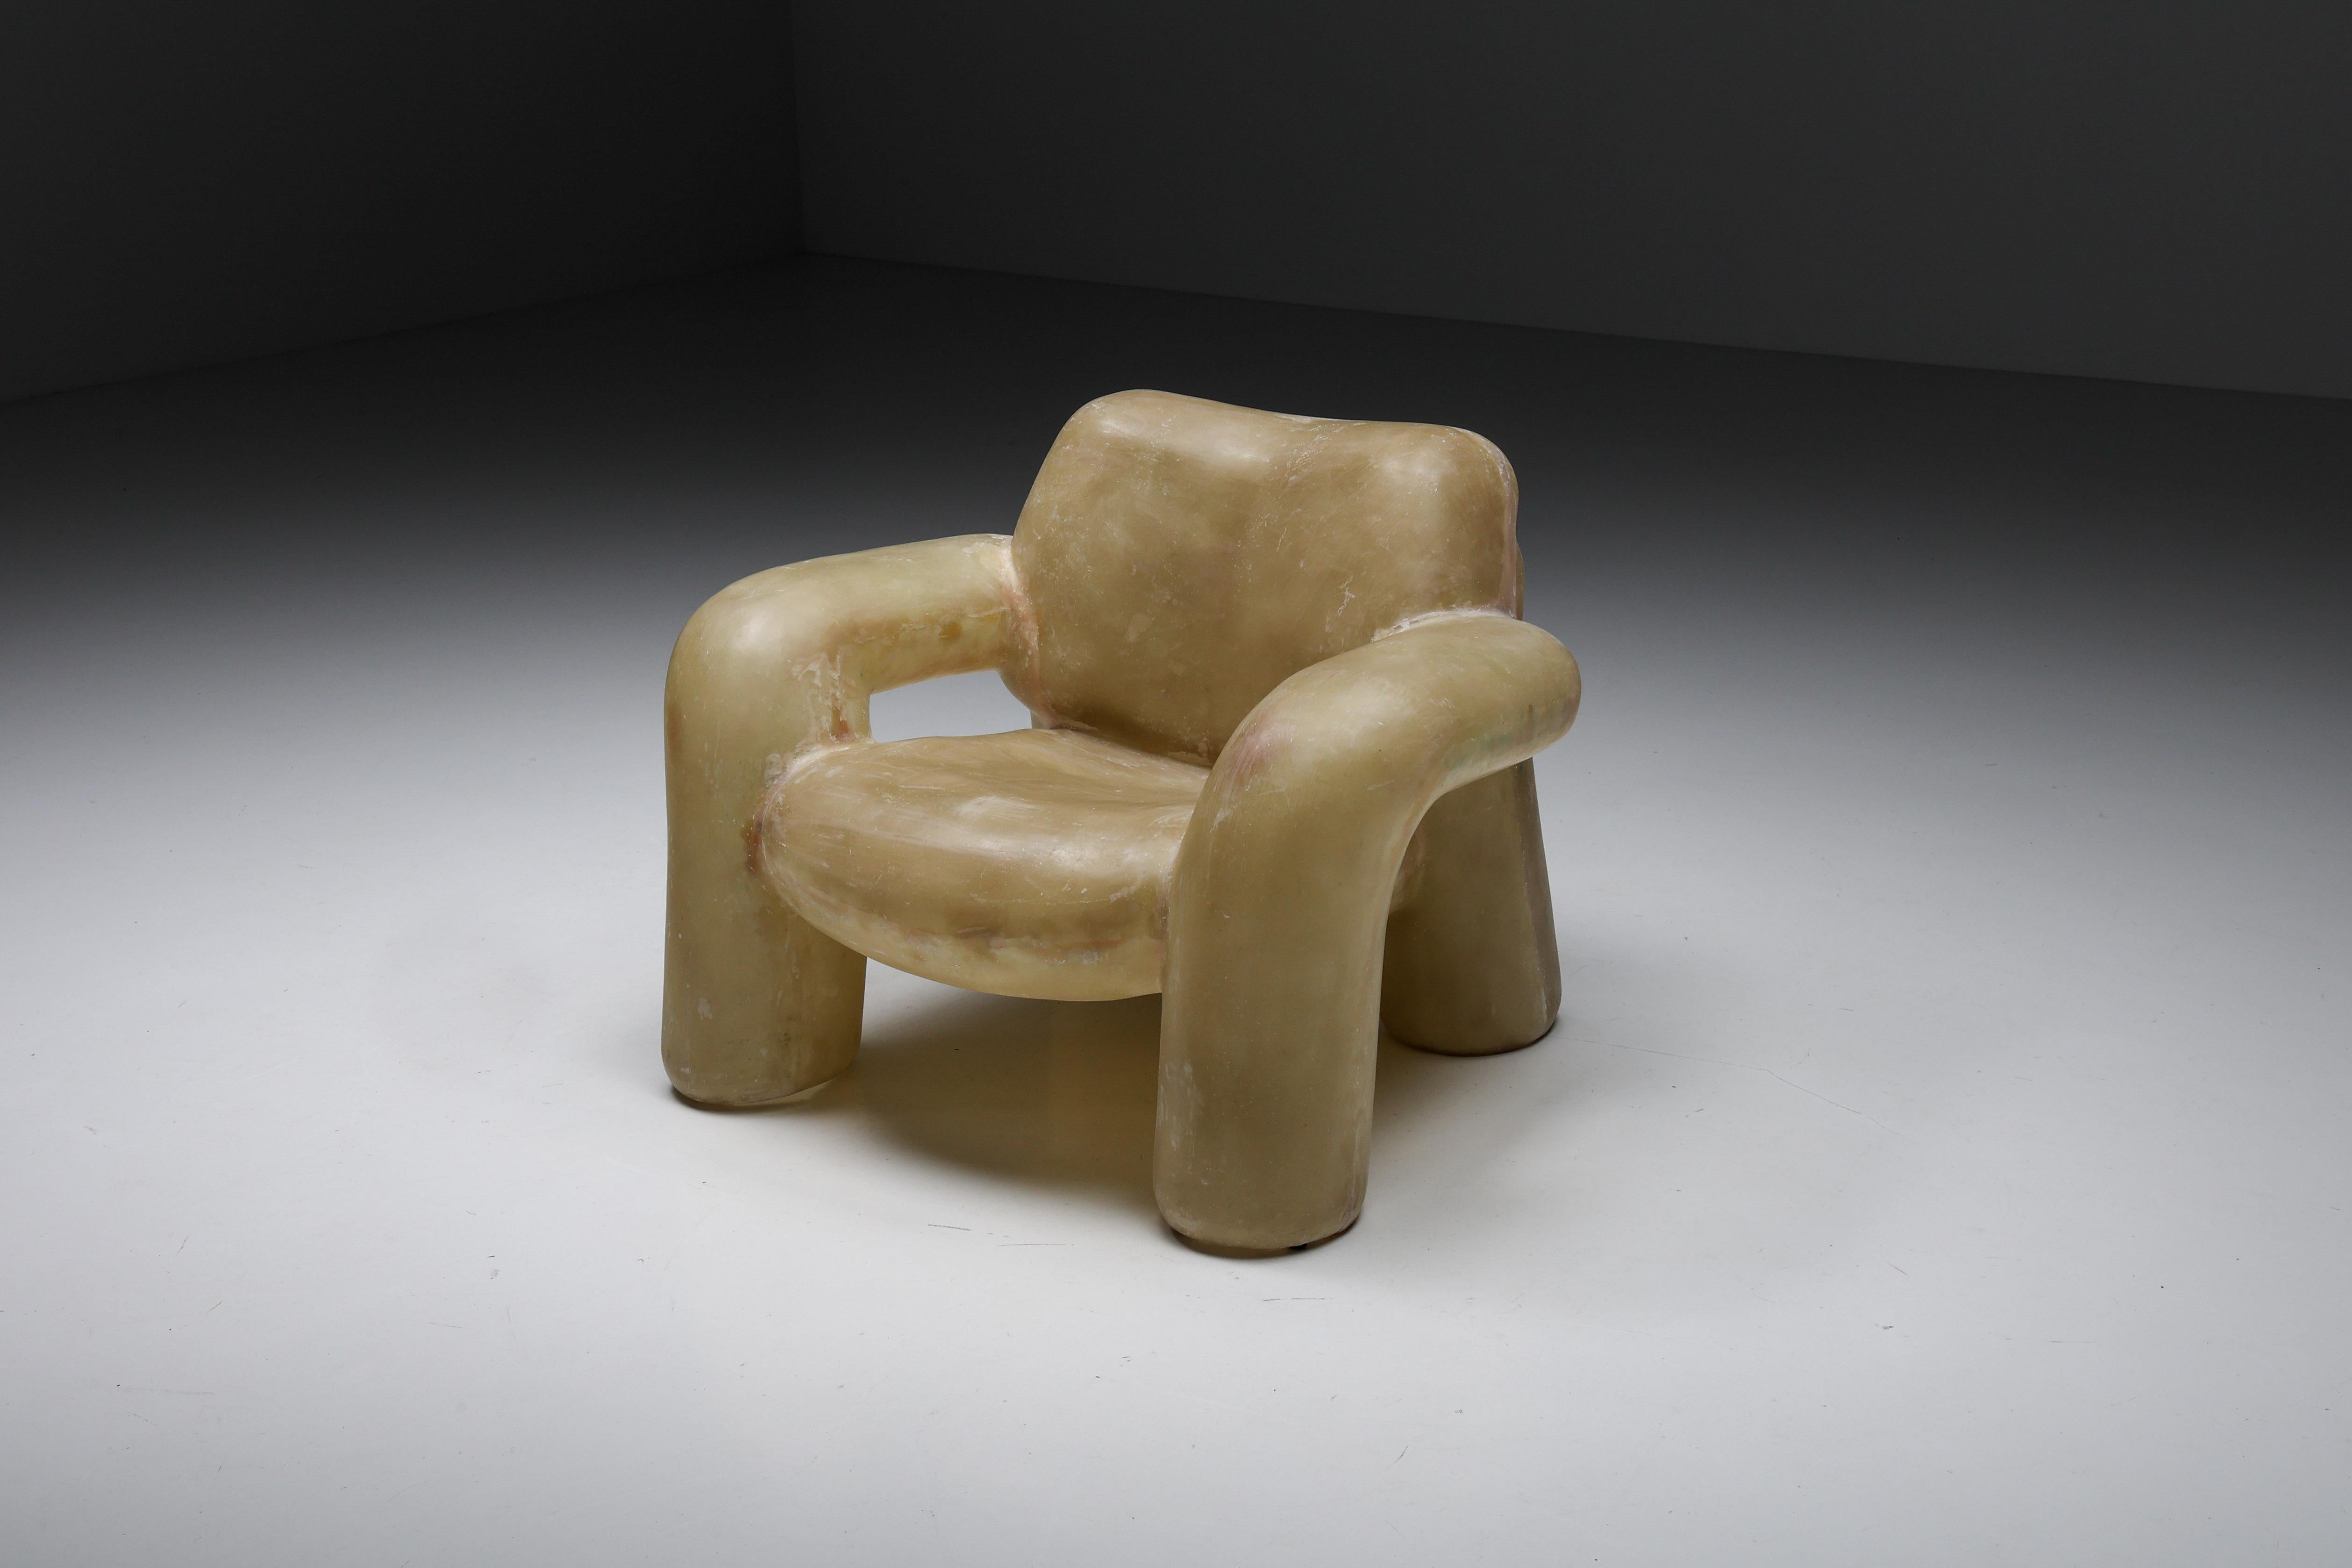 Blown-up chair by Schimmel & Schweikle, made of fiberglass and polyester. This chair is made to order, lead time is approximately two months. Priced per piece.

Schimmel & Schweikle is an ongoing collaboration between Janne Schimmel and Moreno